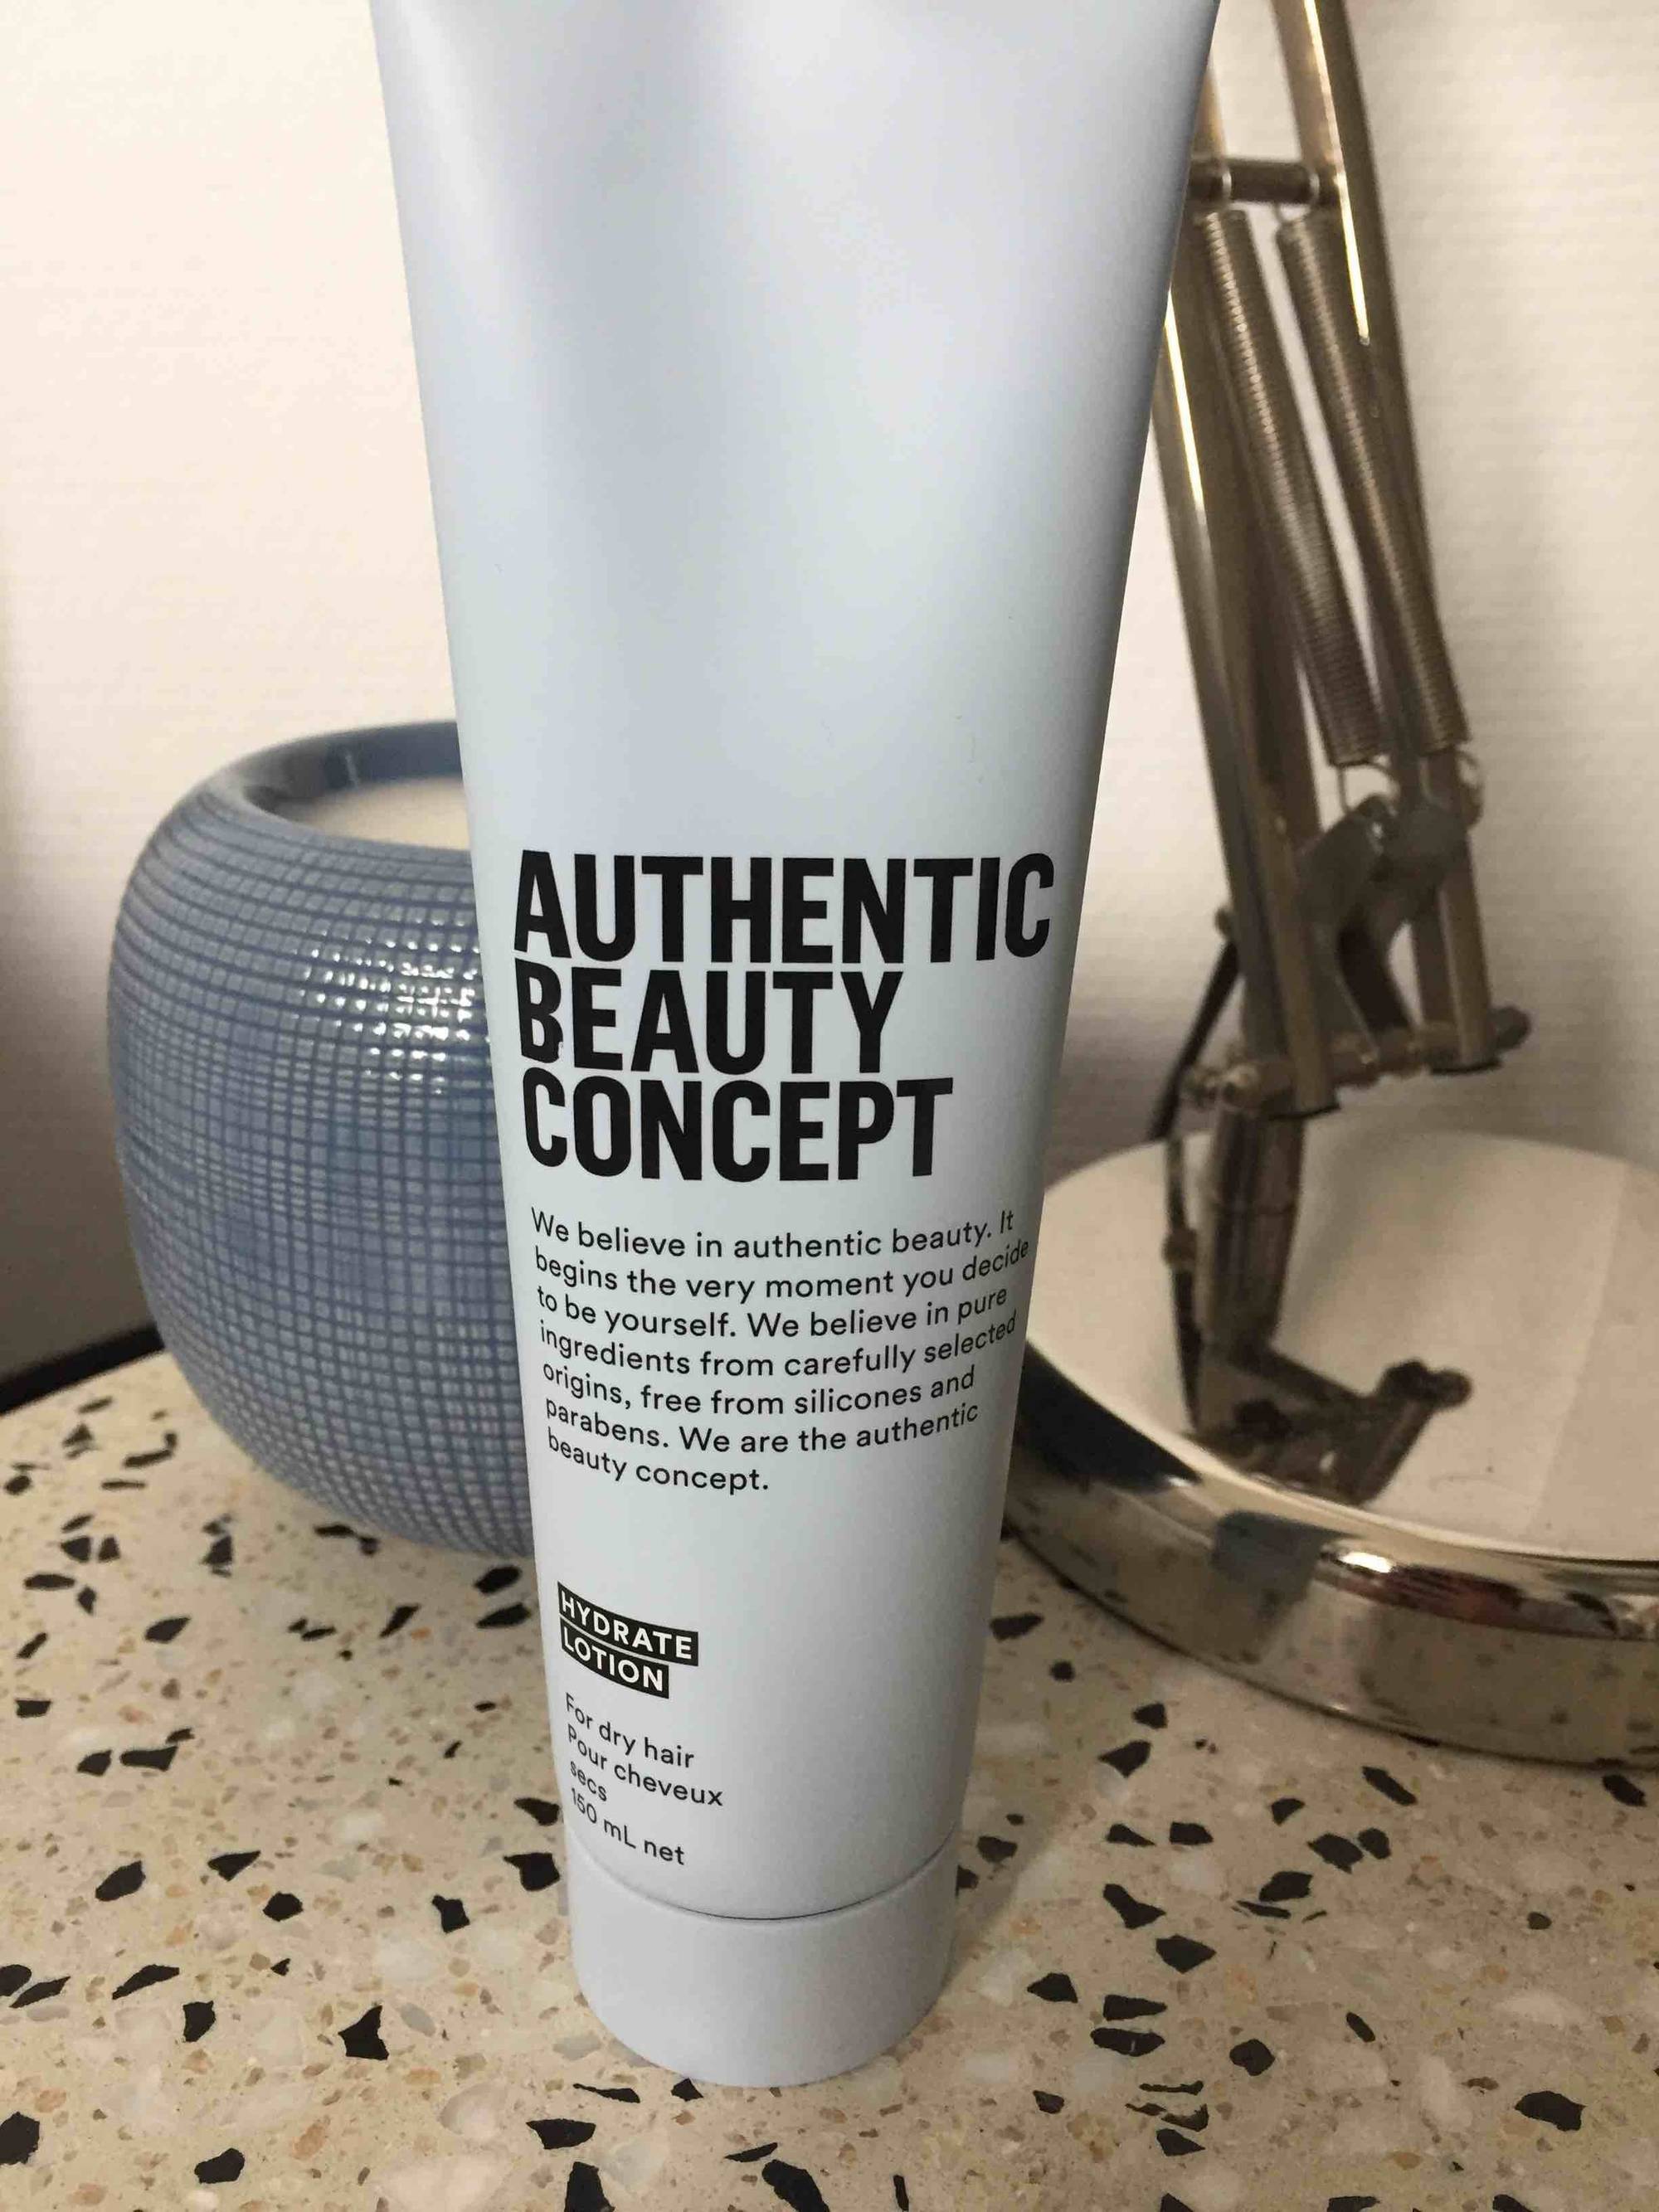 AUTHENTIC BEAUTY CONCEPT - Hydrate lotion 